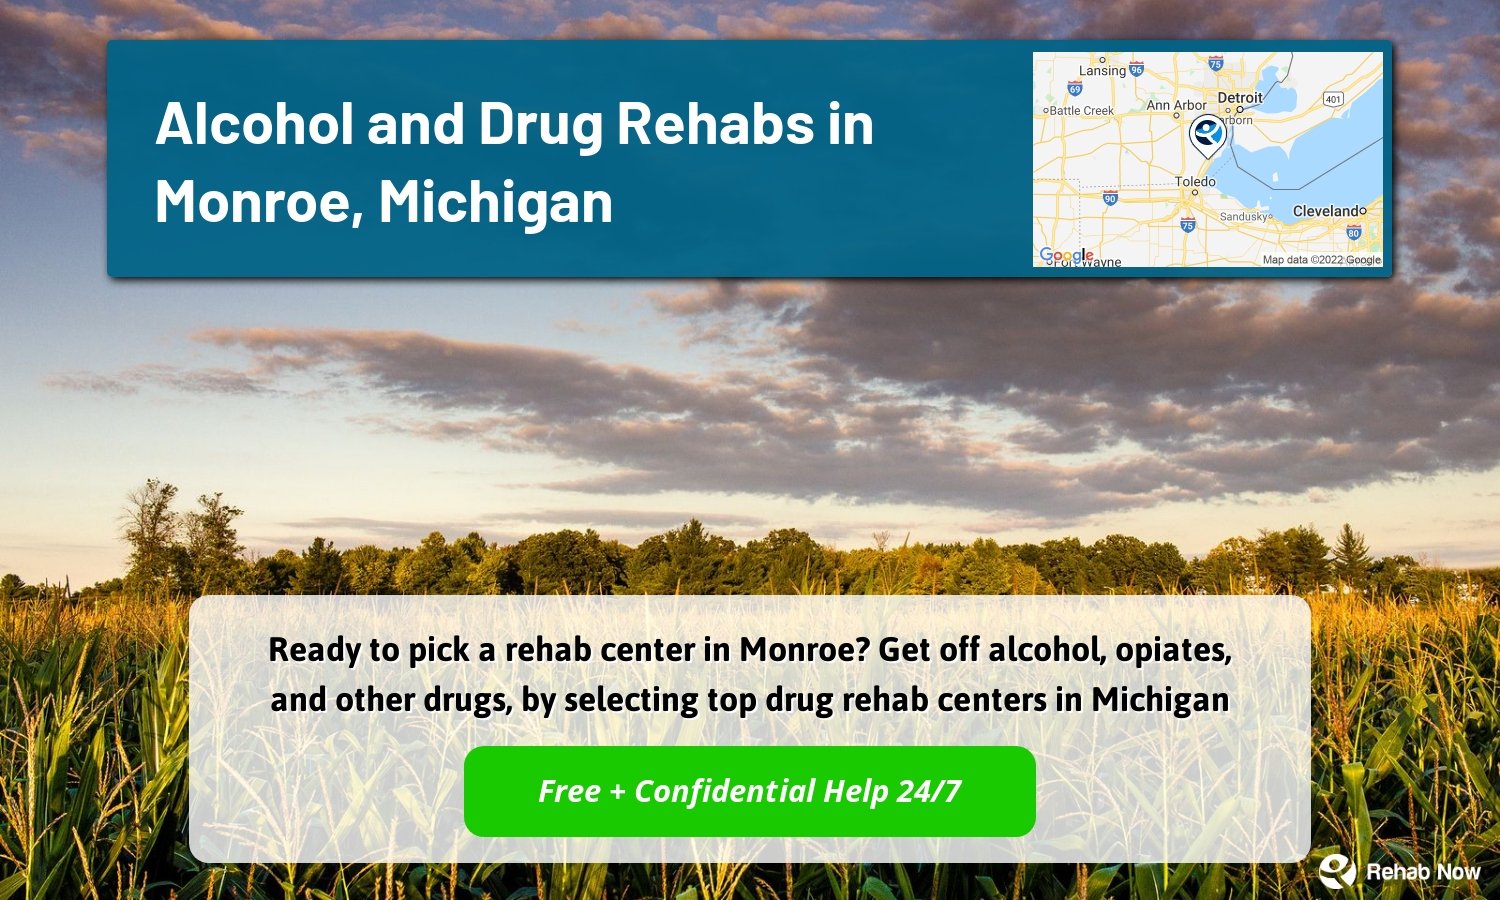 Ready to pick a rehab center in Monroe? Get off alcohol, opiates, and other drugs, by selecting top drug rehab centers in Michigan